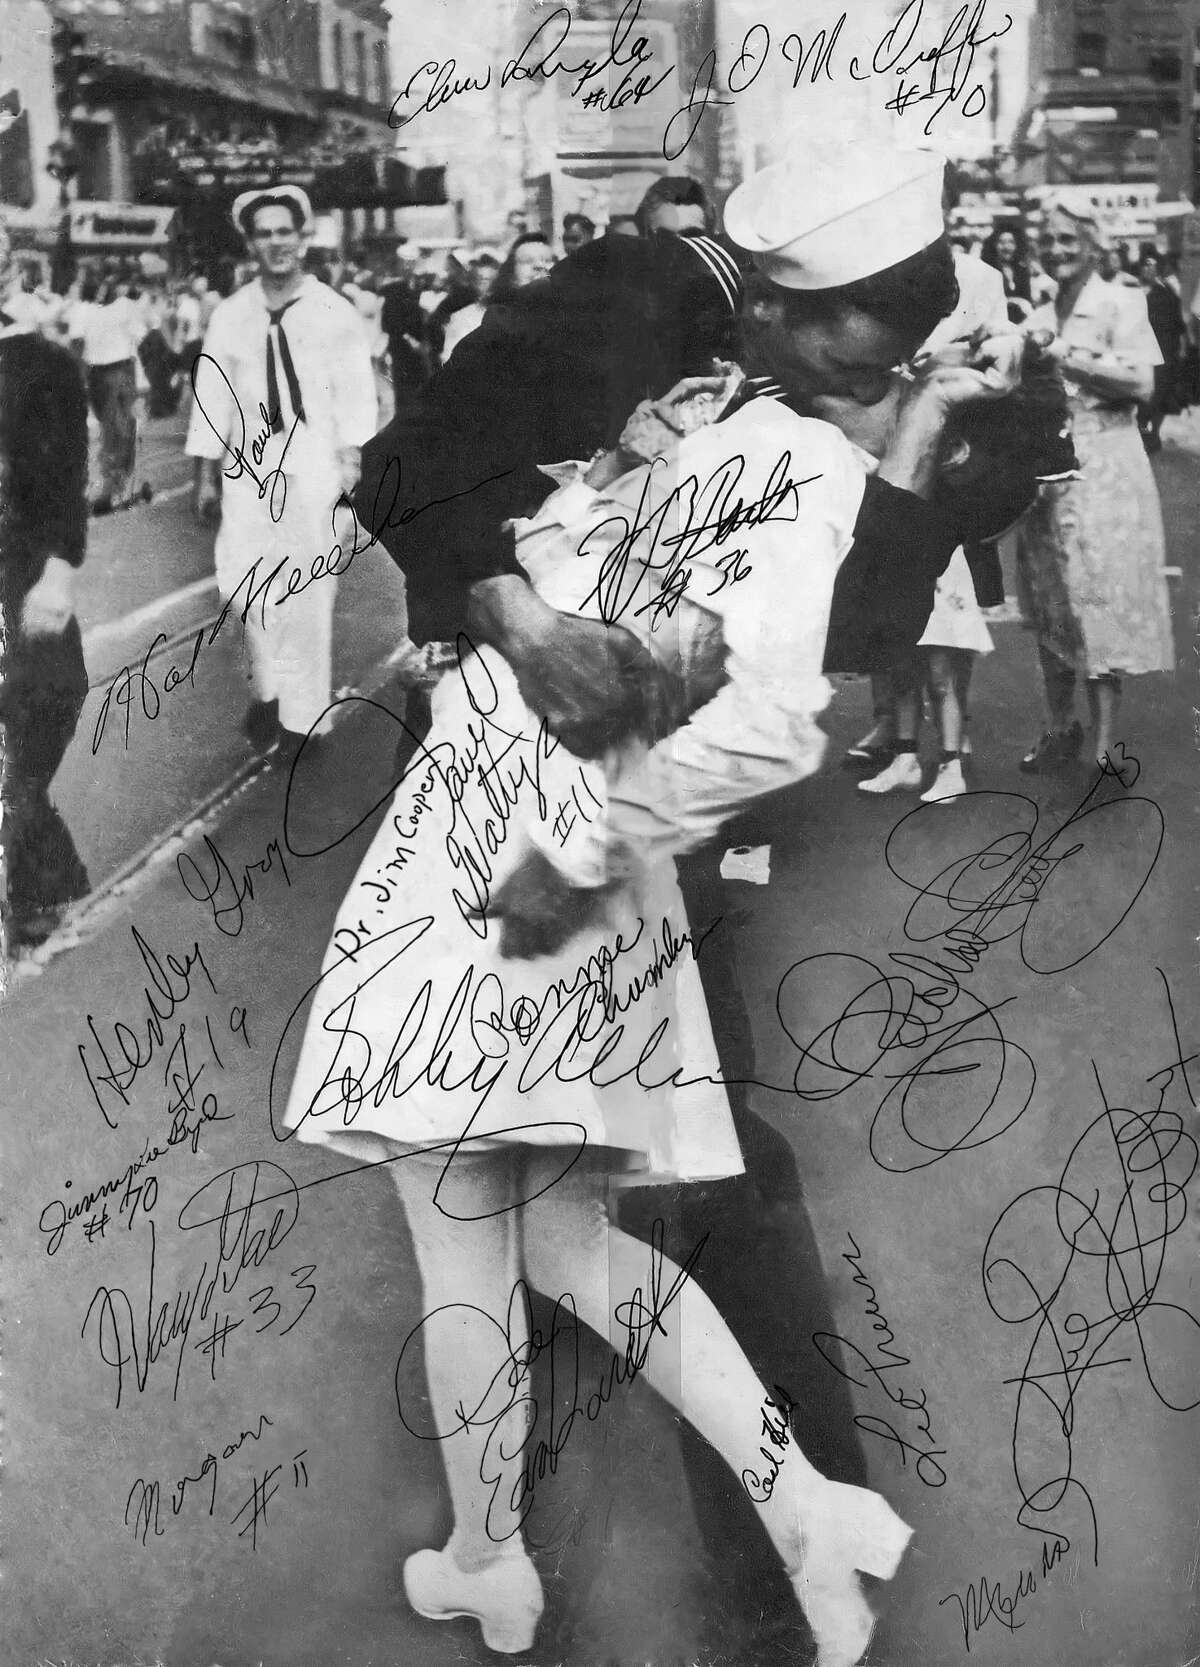 Glenn carried this photograph around for quite a while and a friend, Lloyd Sullivan, restored the photograph taking hours to make sure he did not harm the signatures. The signatures included Dale Ernhardt, Richard Petty, Kyle Petty, and Bobby Allison, whom McDuffie had all befriended. (Photos courtesy of Rene Armstrong)